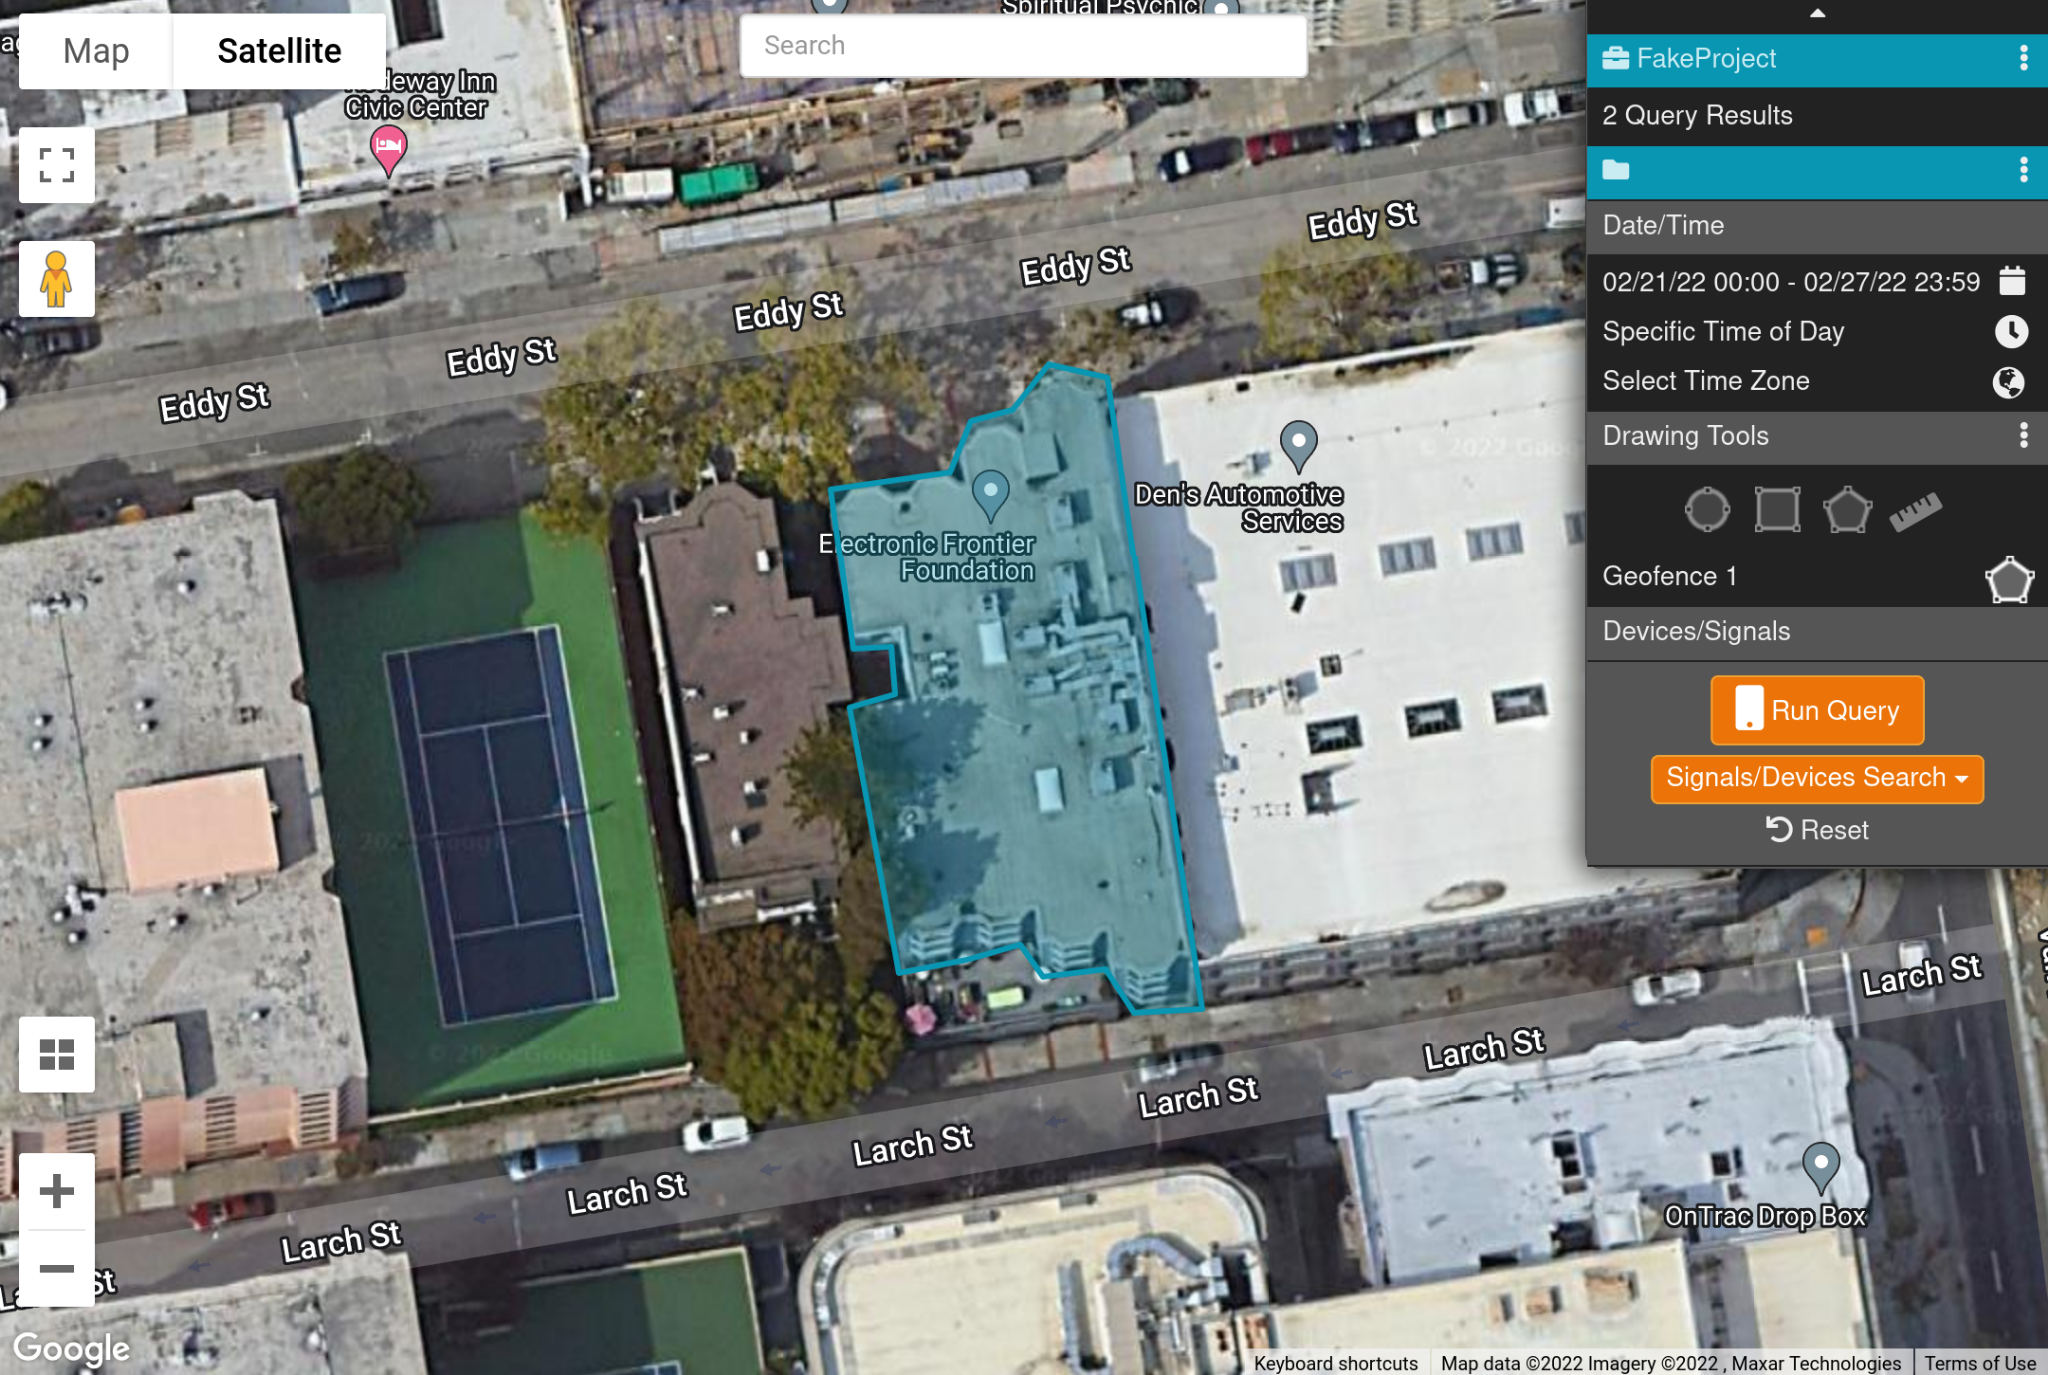 A more detailed geofenced query is overlaid on a Google Maps view of the EFF office in San Francisco.